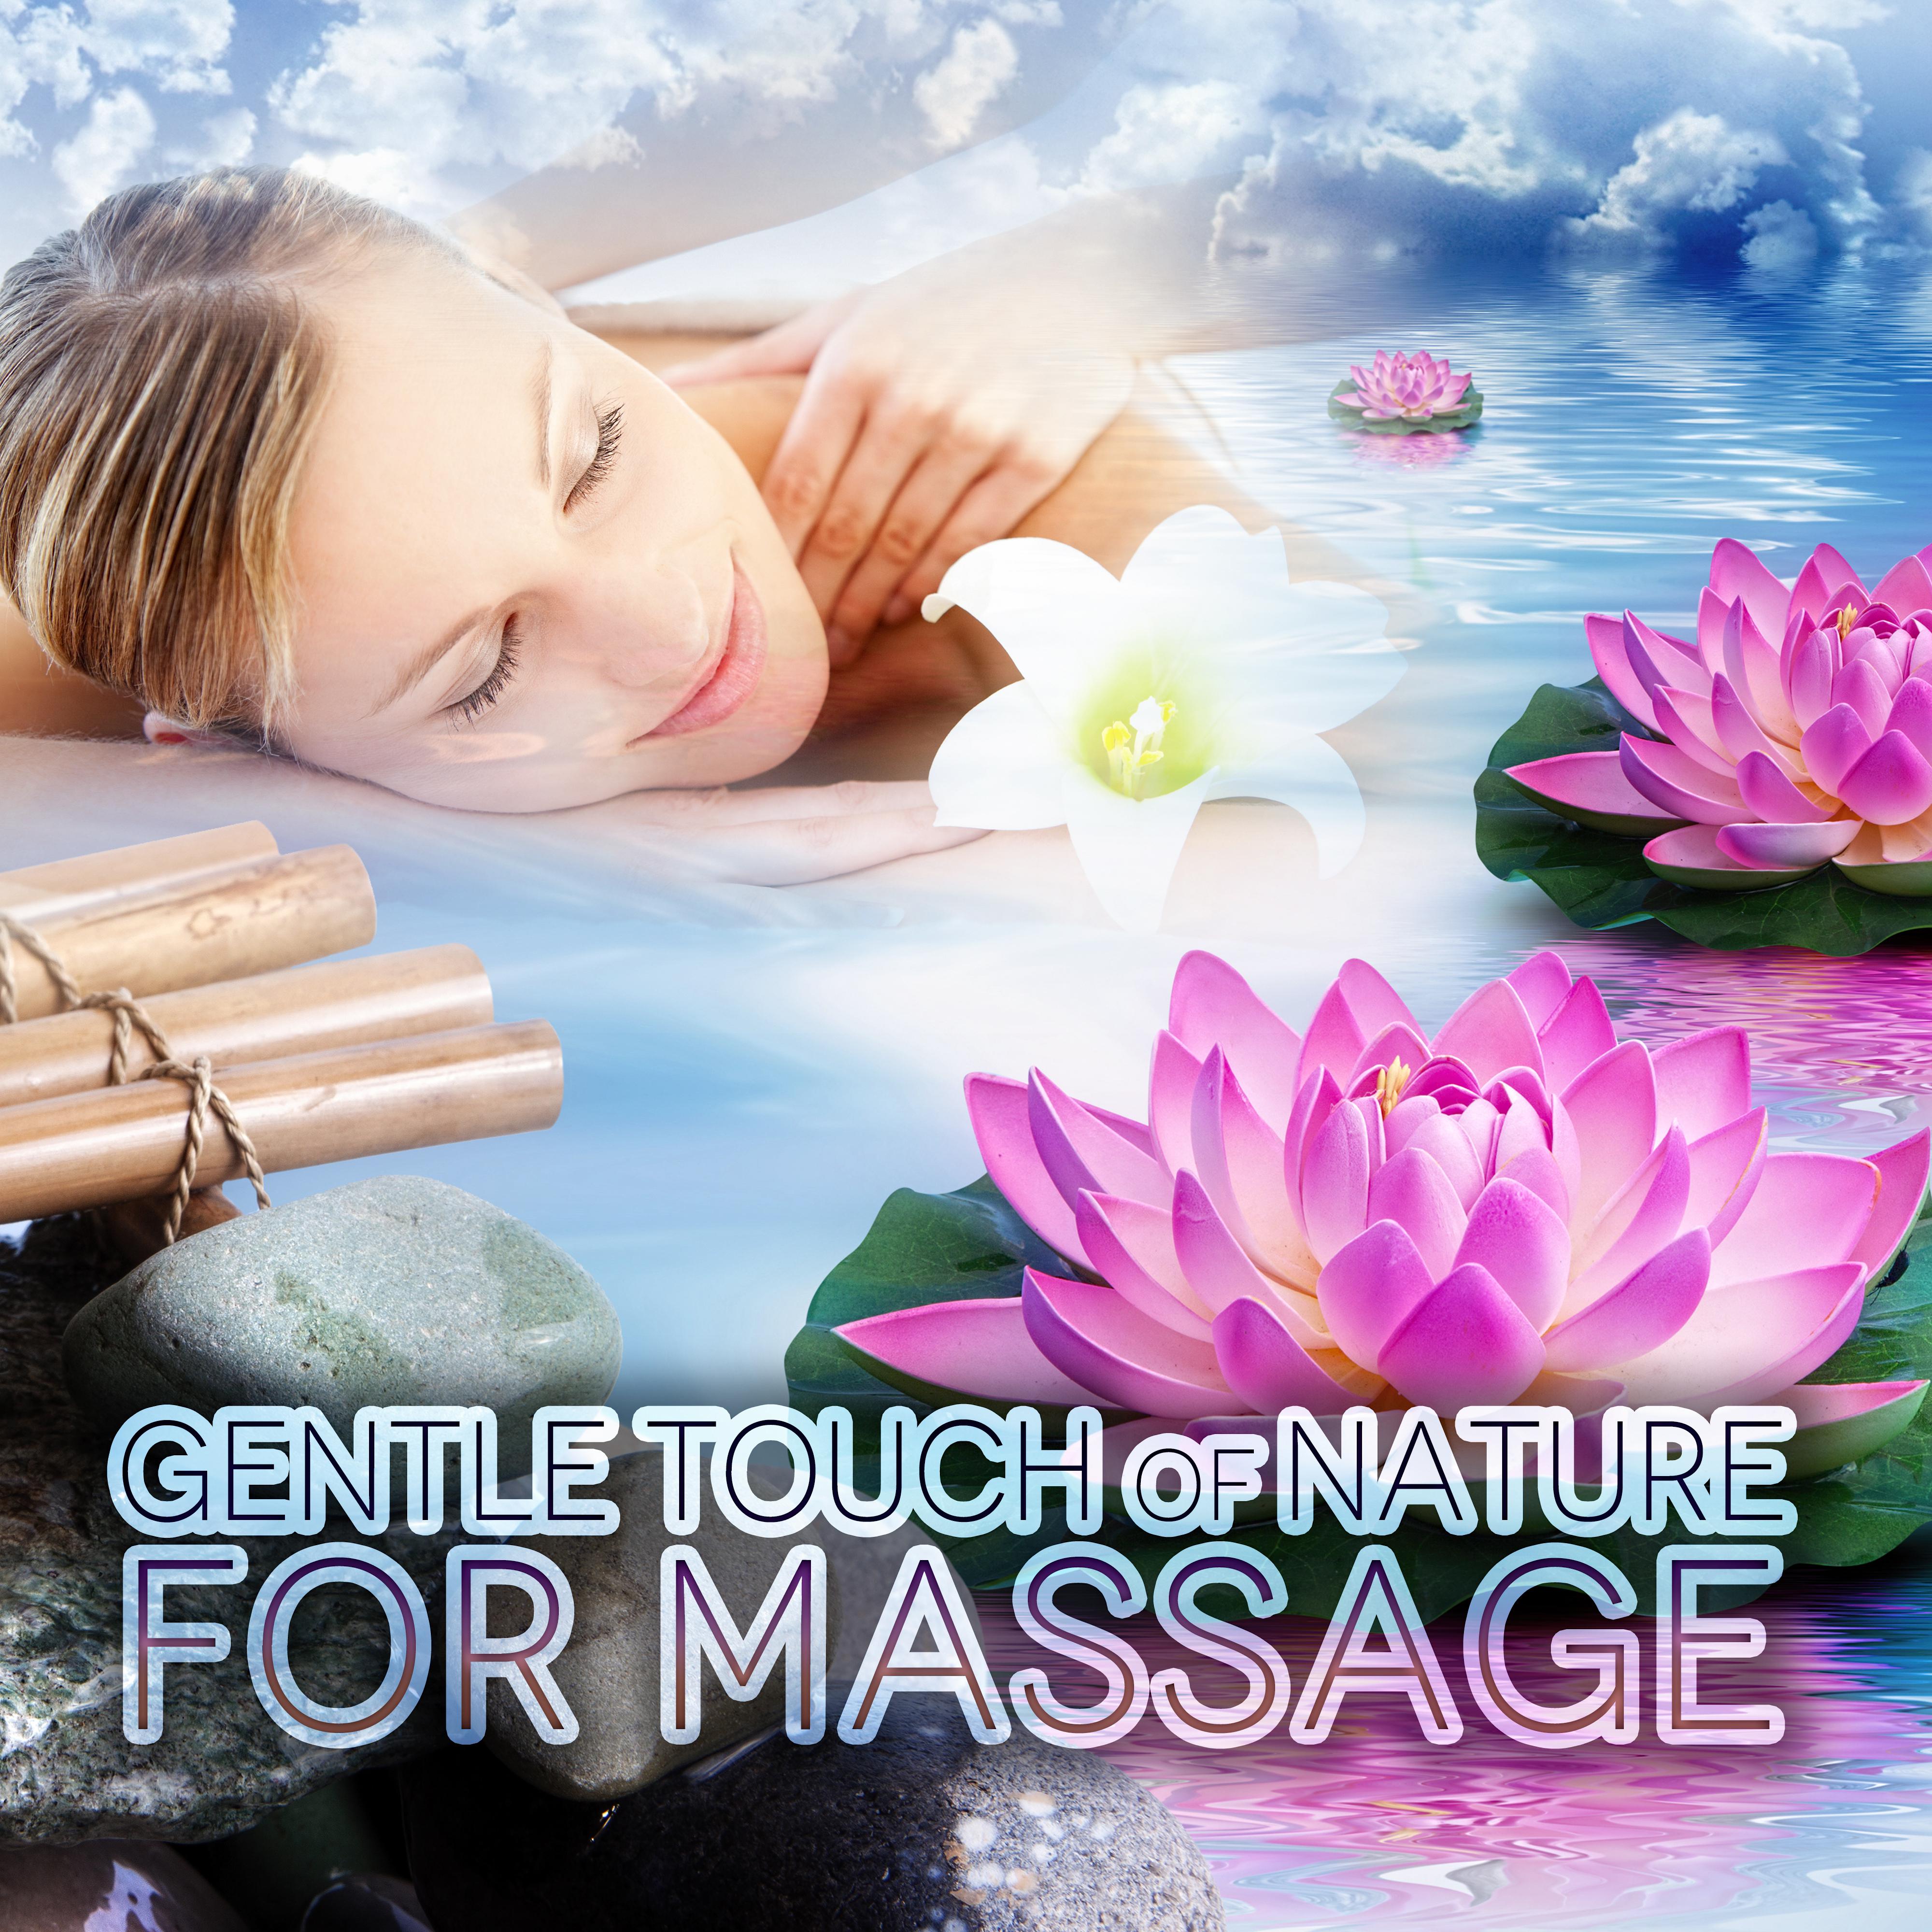 Gentle Touch of Nature for Massage –  Soft Music to Relax, Songs for Spa, Relaxing Sounds, Massage Music, Wellness